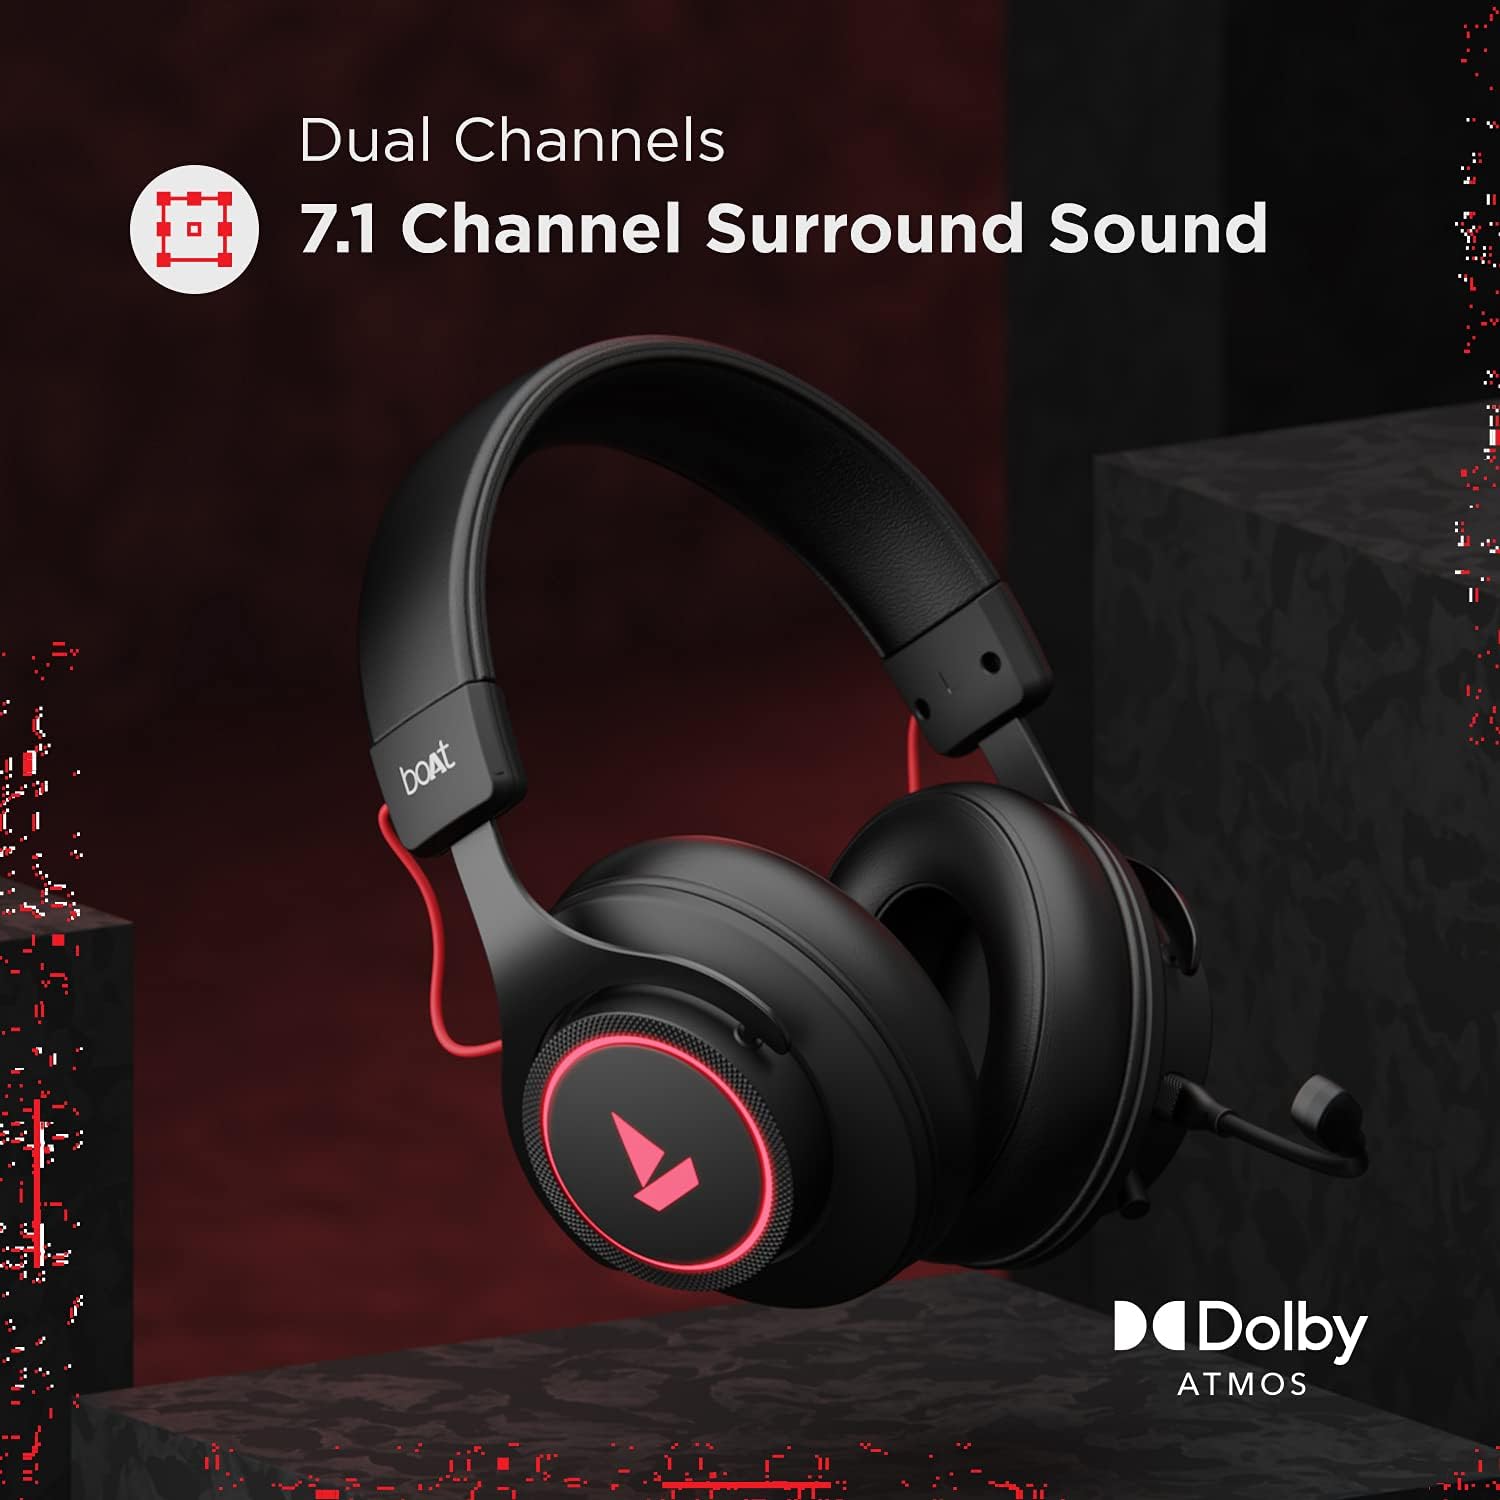 boAt Immortal IM1000D Dual Channel Gaming Wired Over Ear Headphones with mic, 7.1 Channel Surround Audio, Dolby Atmos, 50mm Drivers & RGB Breathing LEDs(Black Sabre)